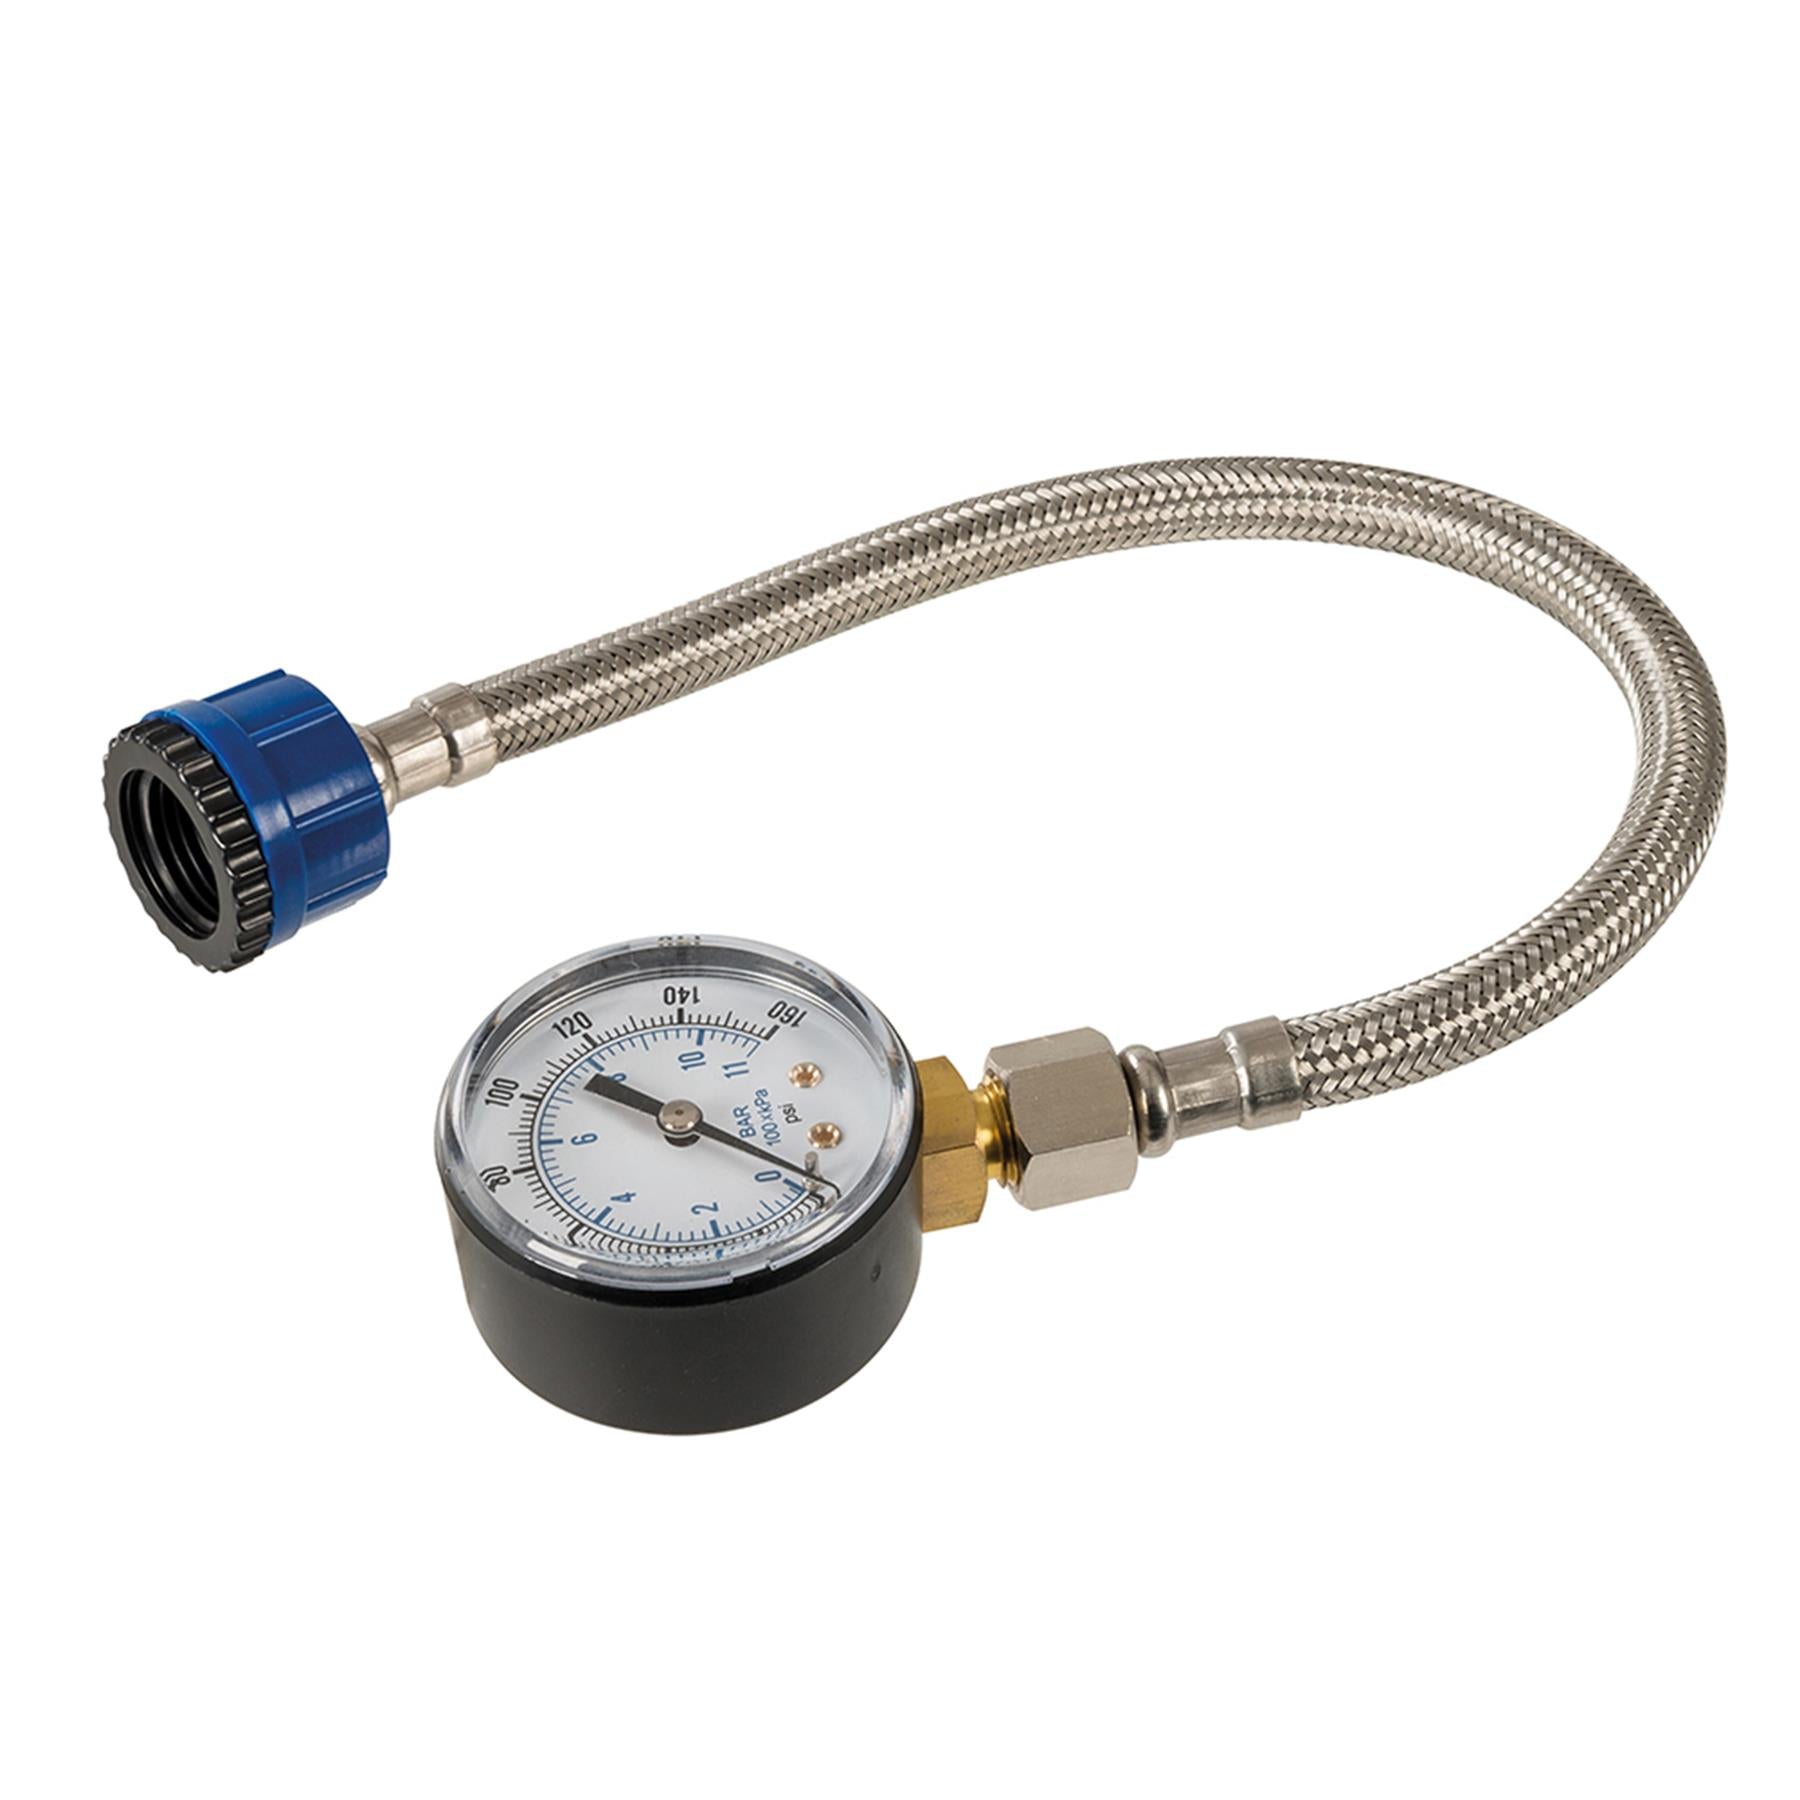 Mains Water Pressure Test Gauge 0-11bar (0-160psi) With Stainless Steel Hose